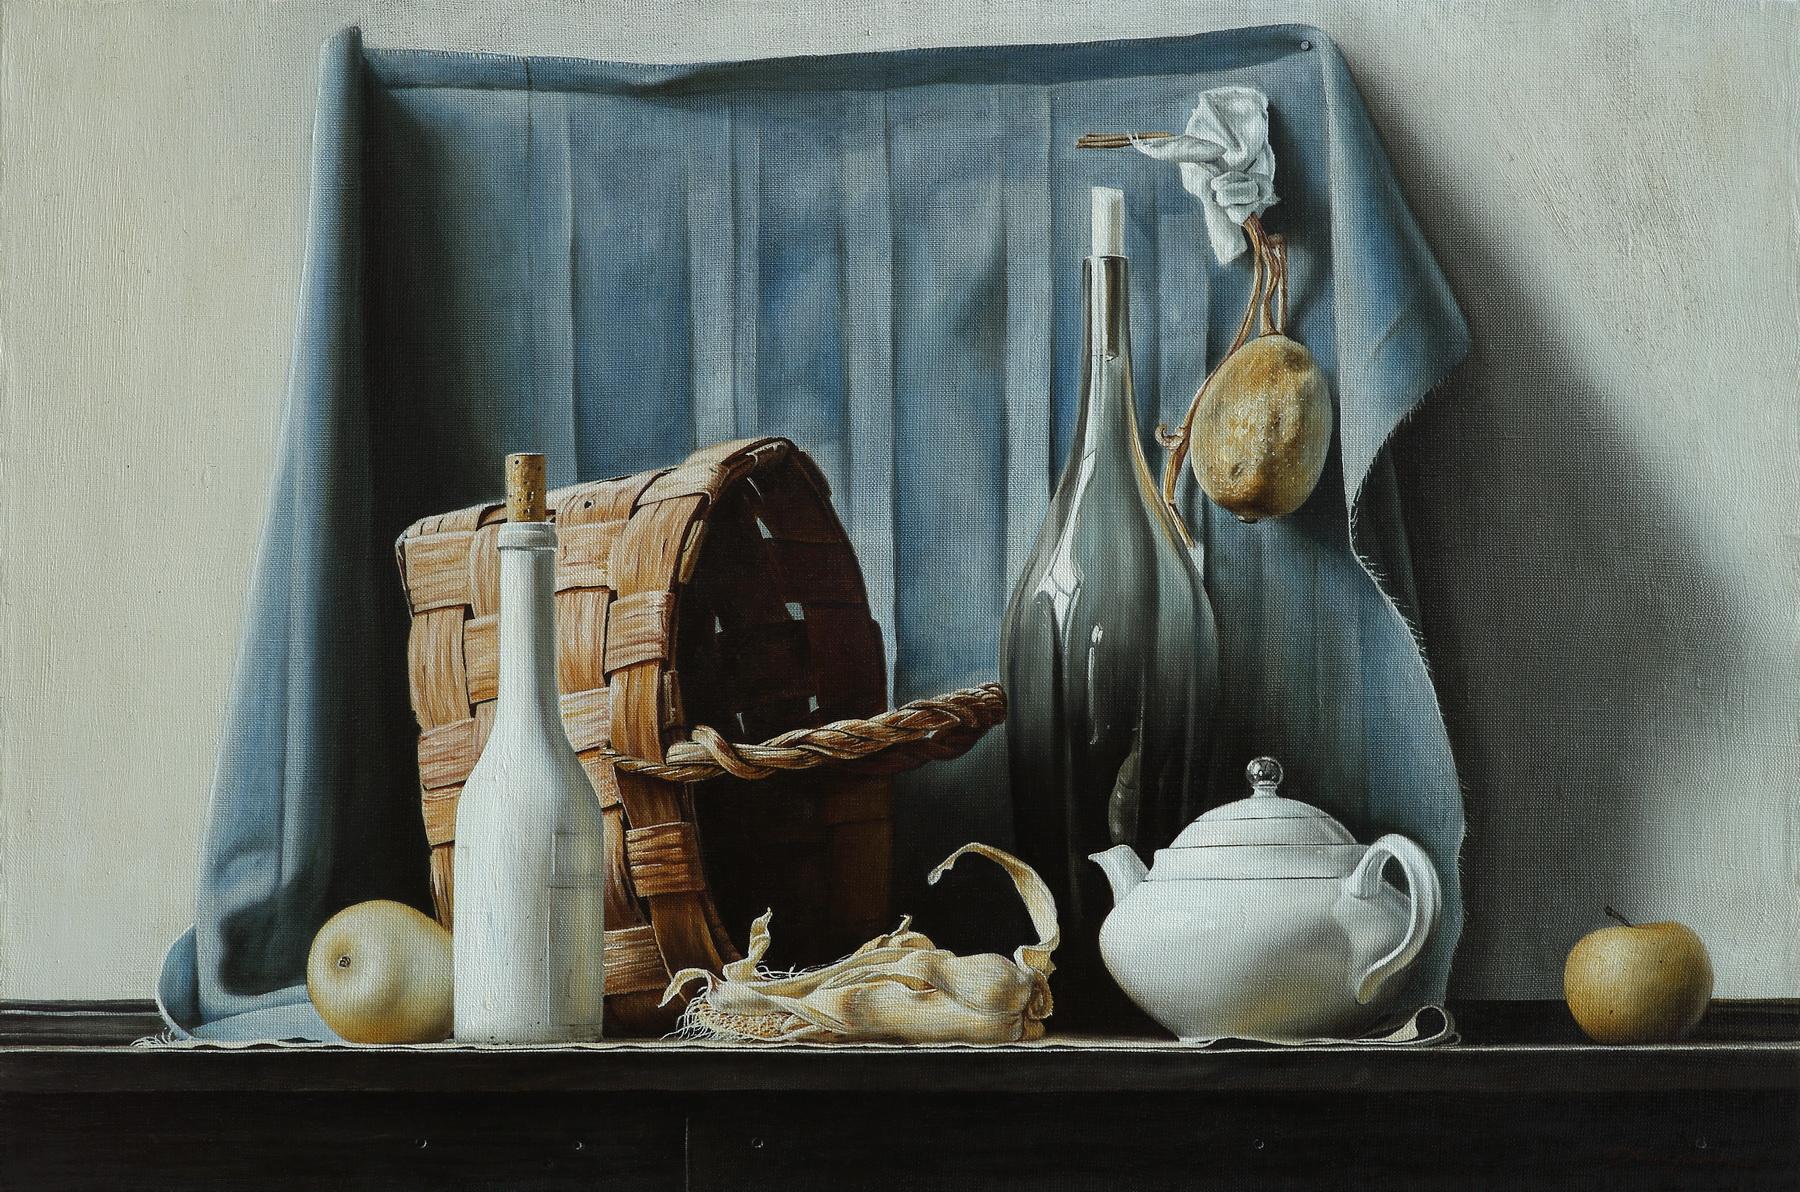 Still life with a basket